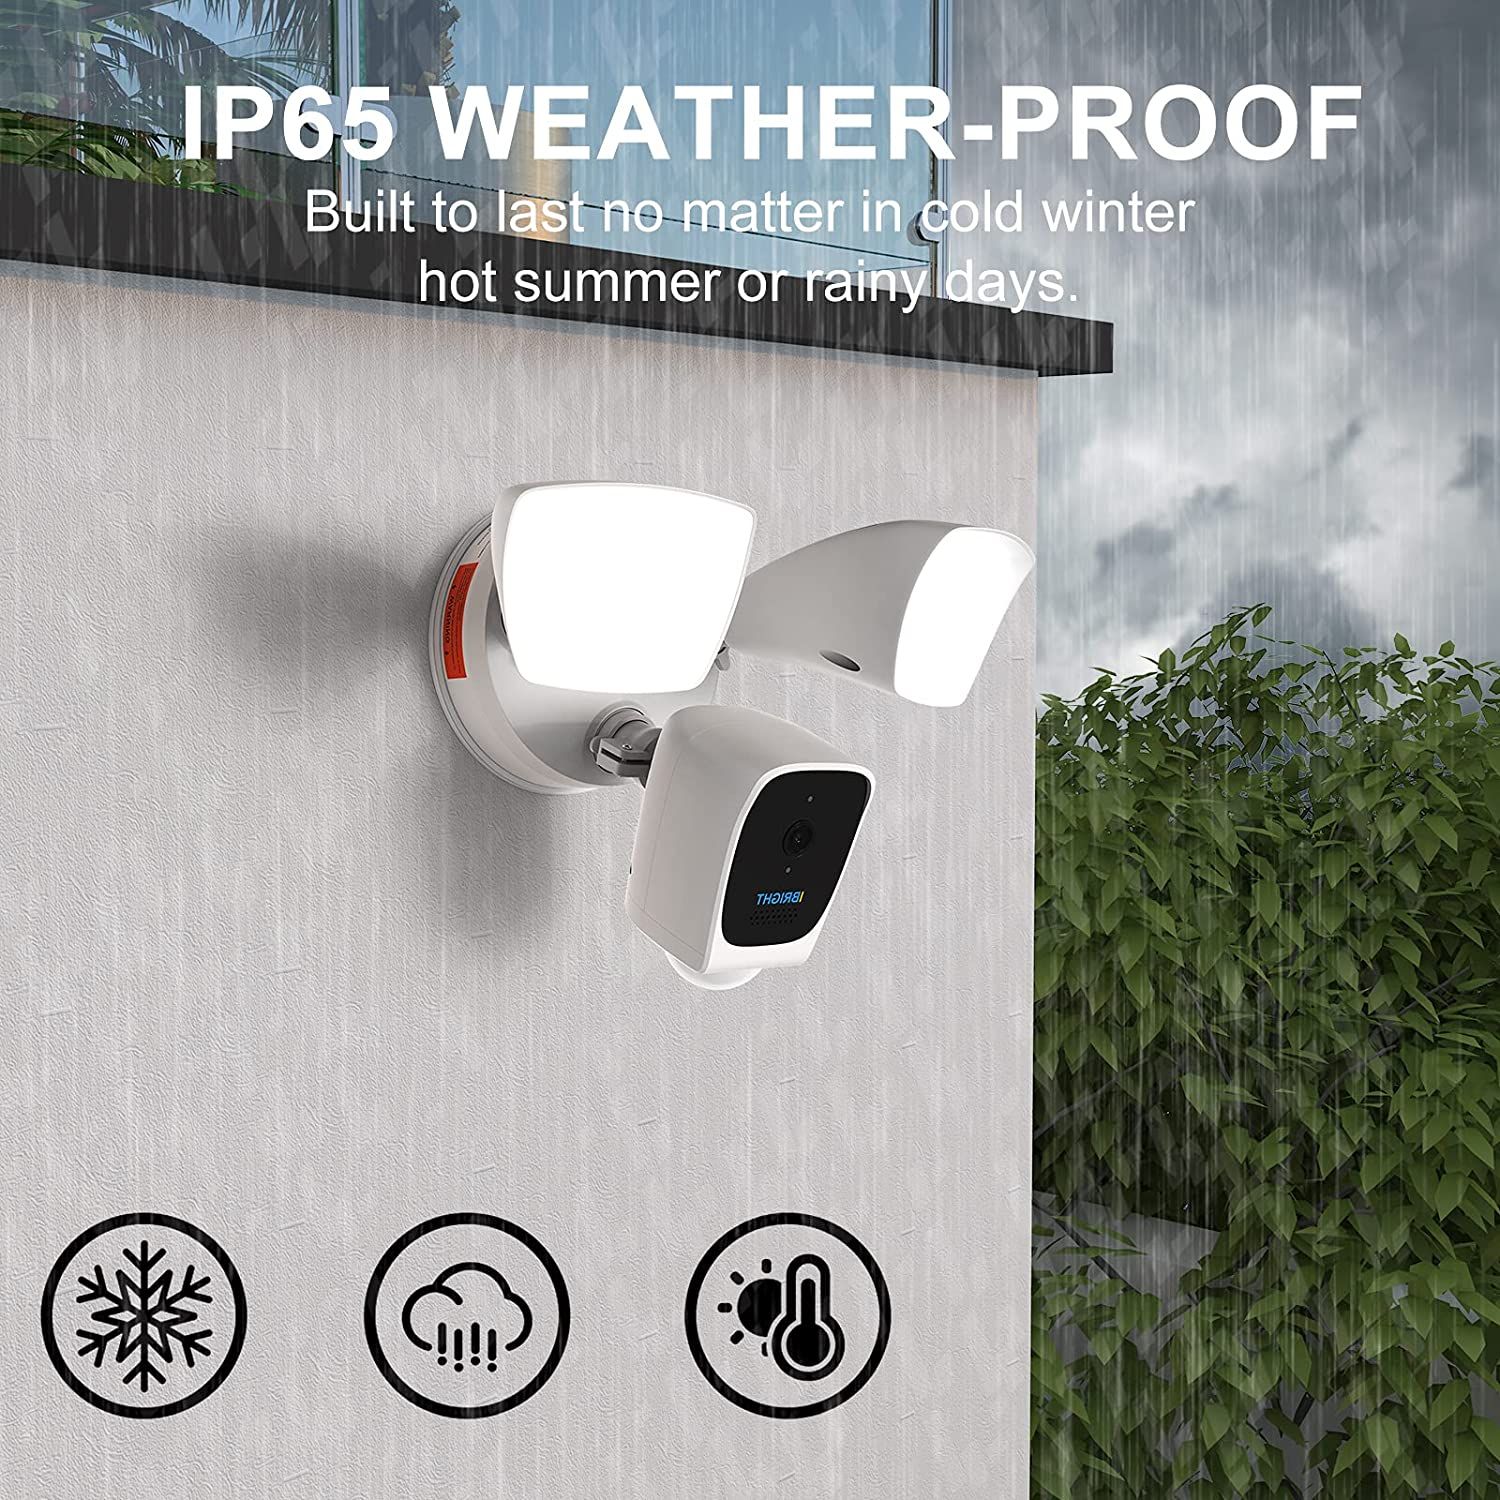 IBRIGHT Smart Floodlight Camera weather proof features